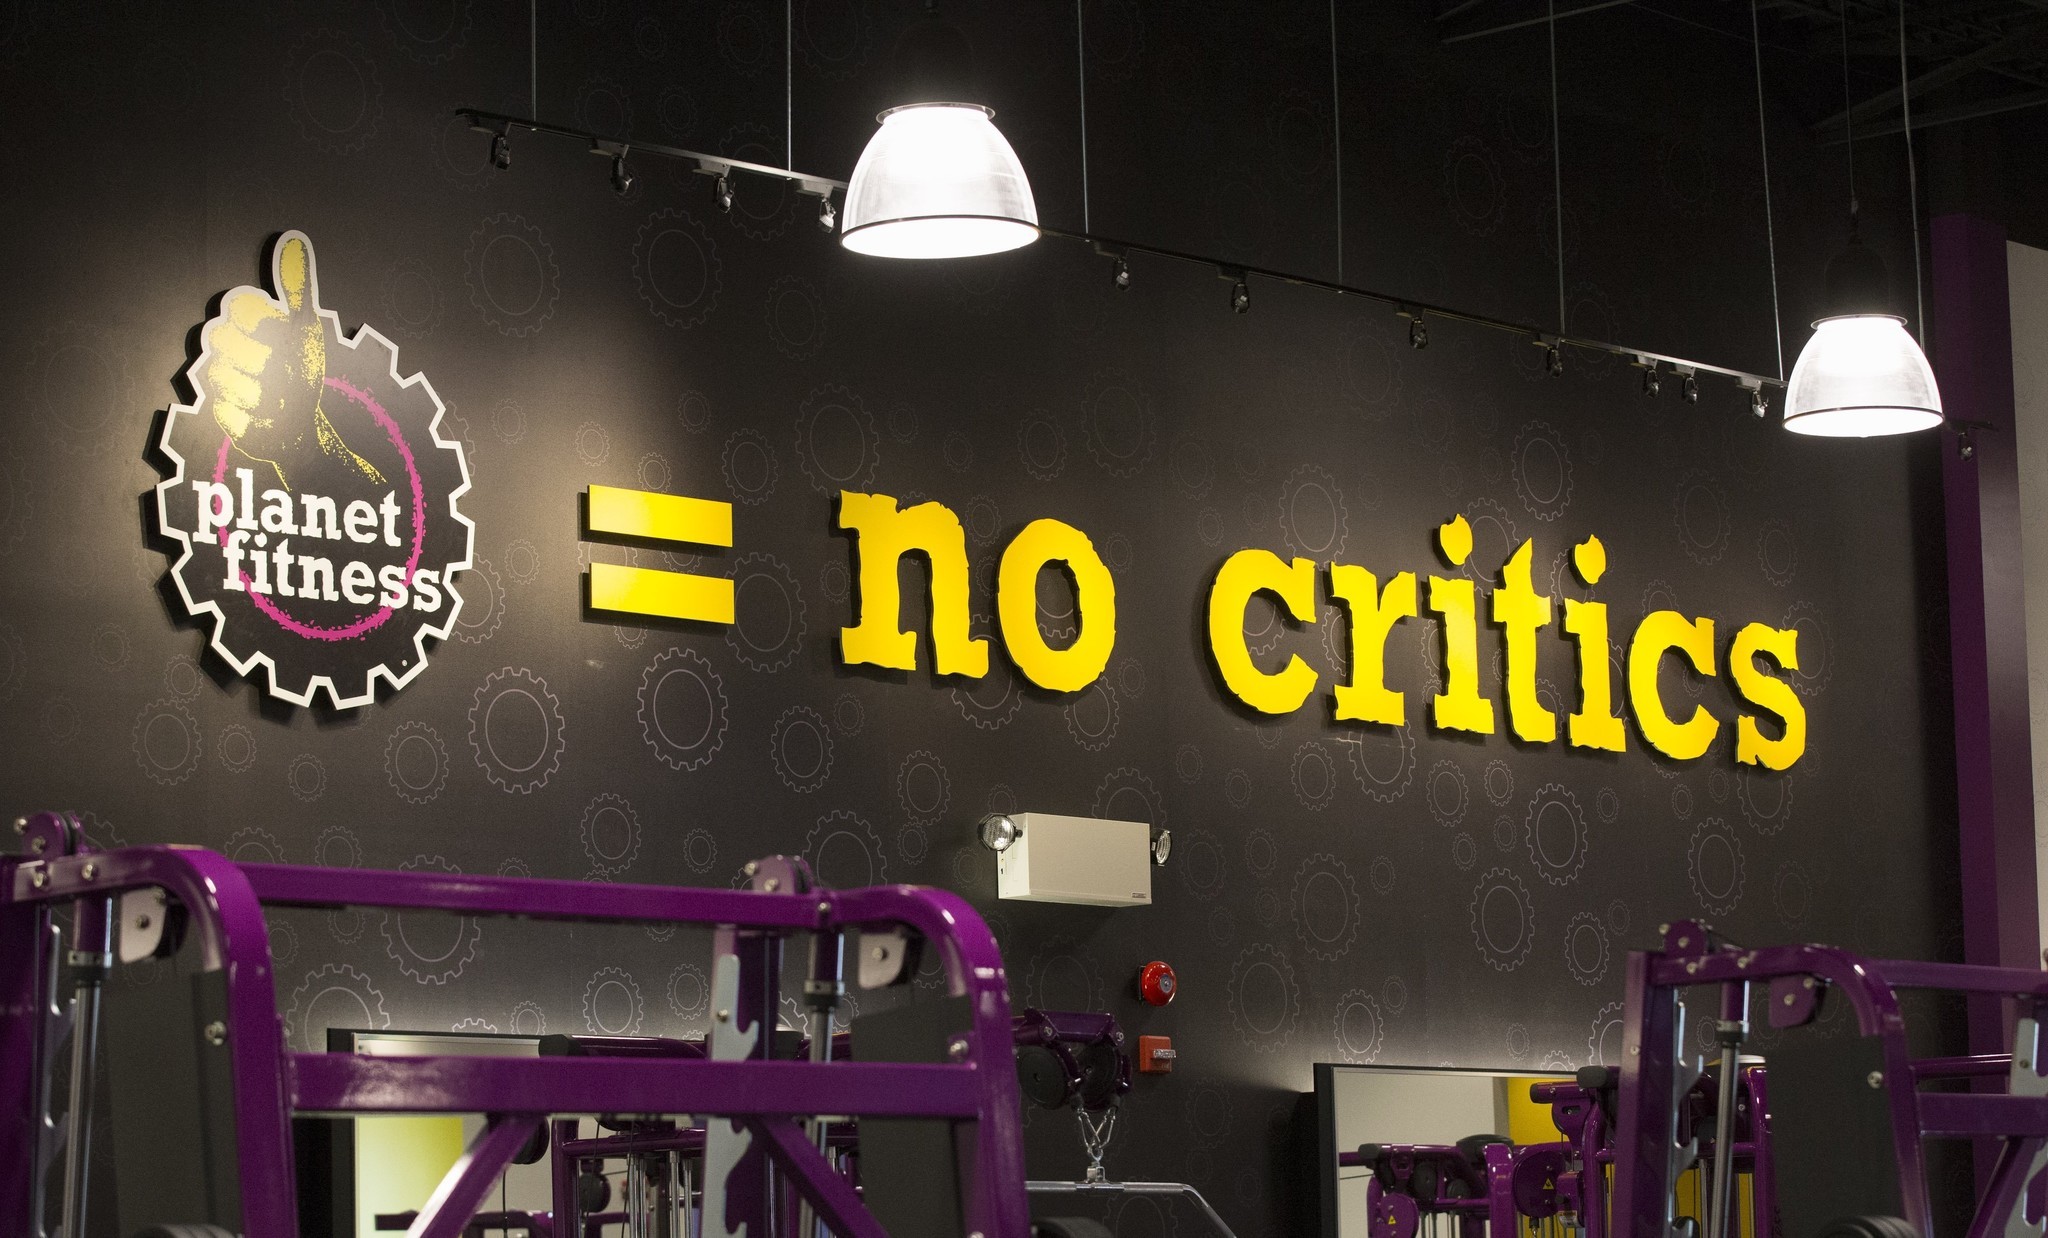 Man arrested for naked workout at Planet Fitness